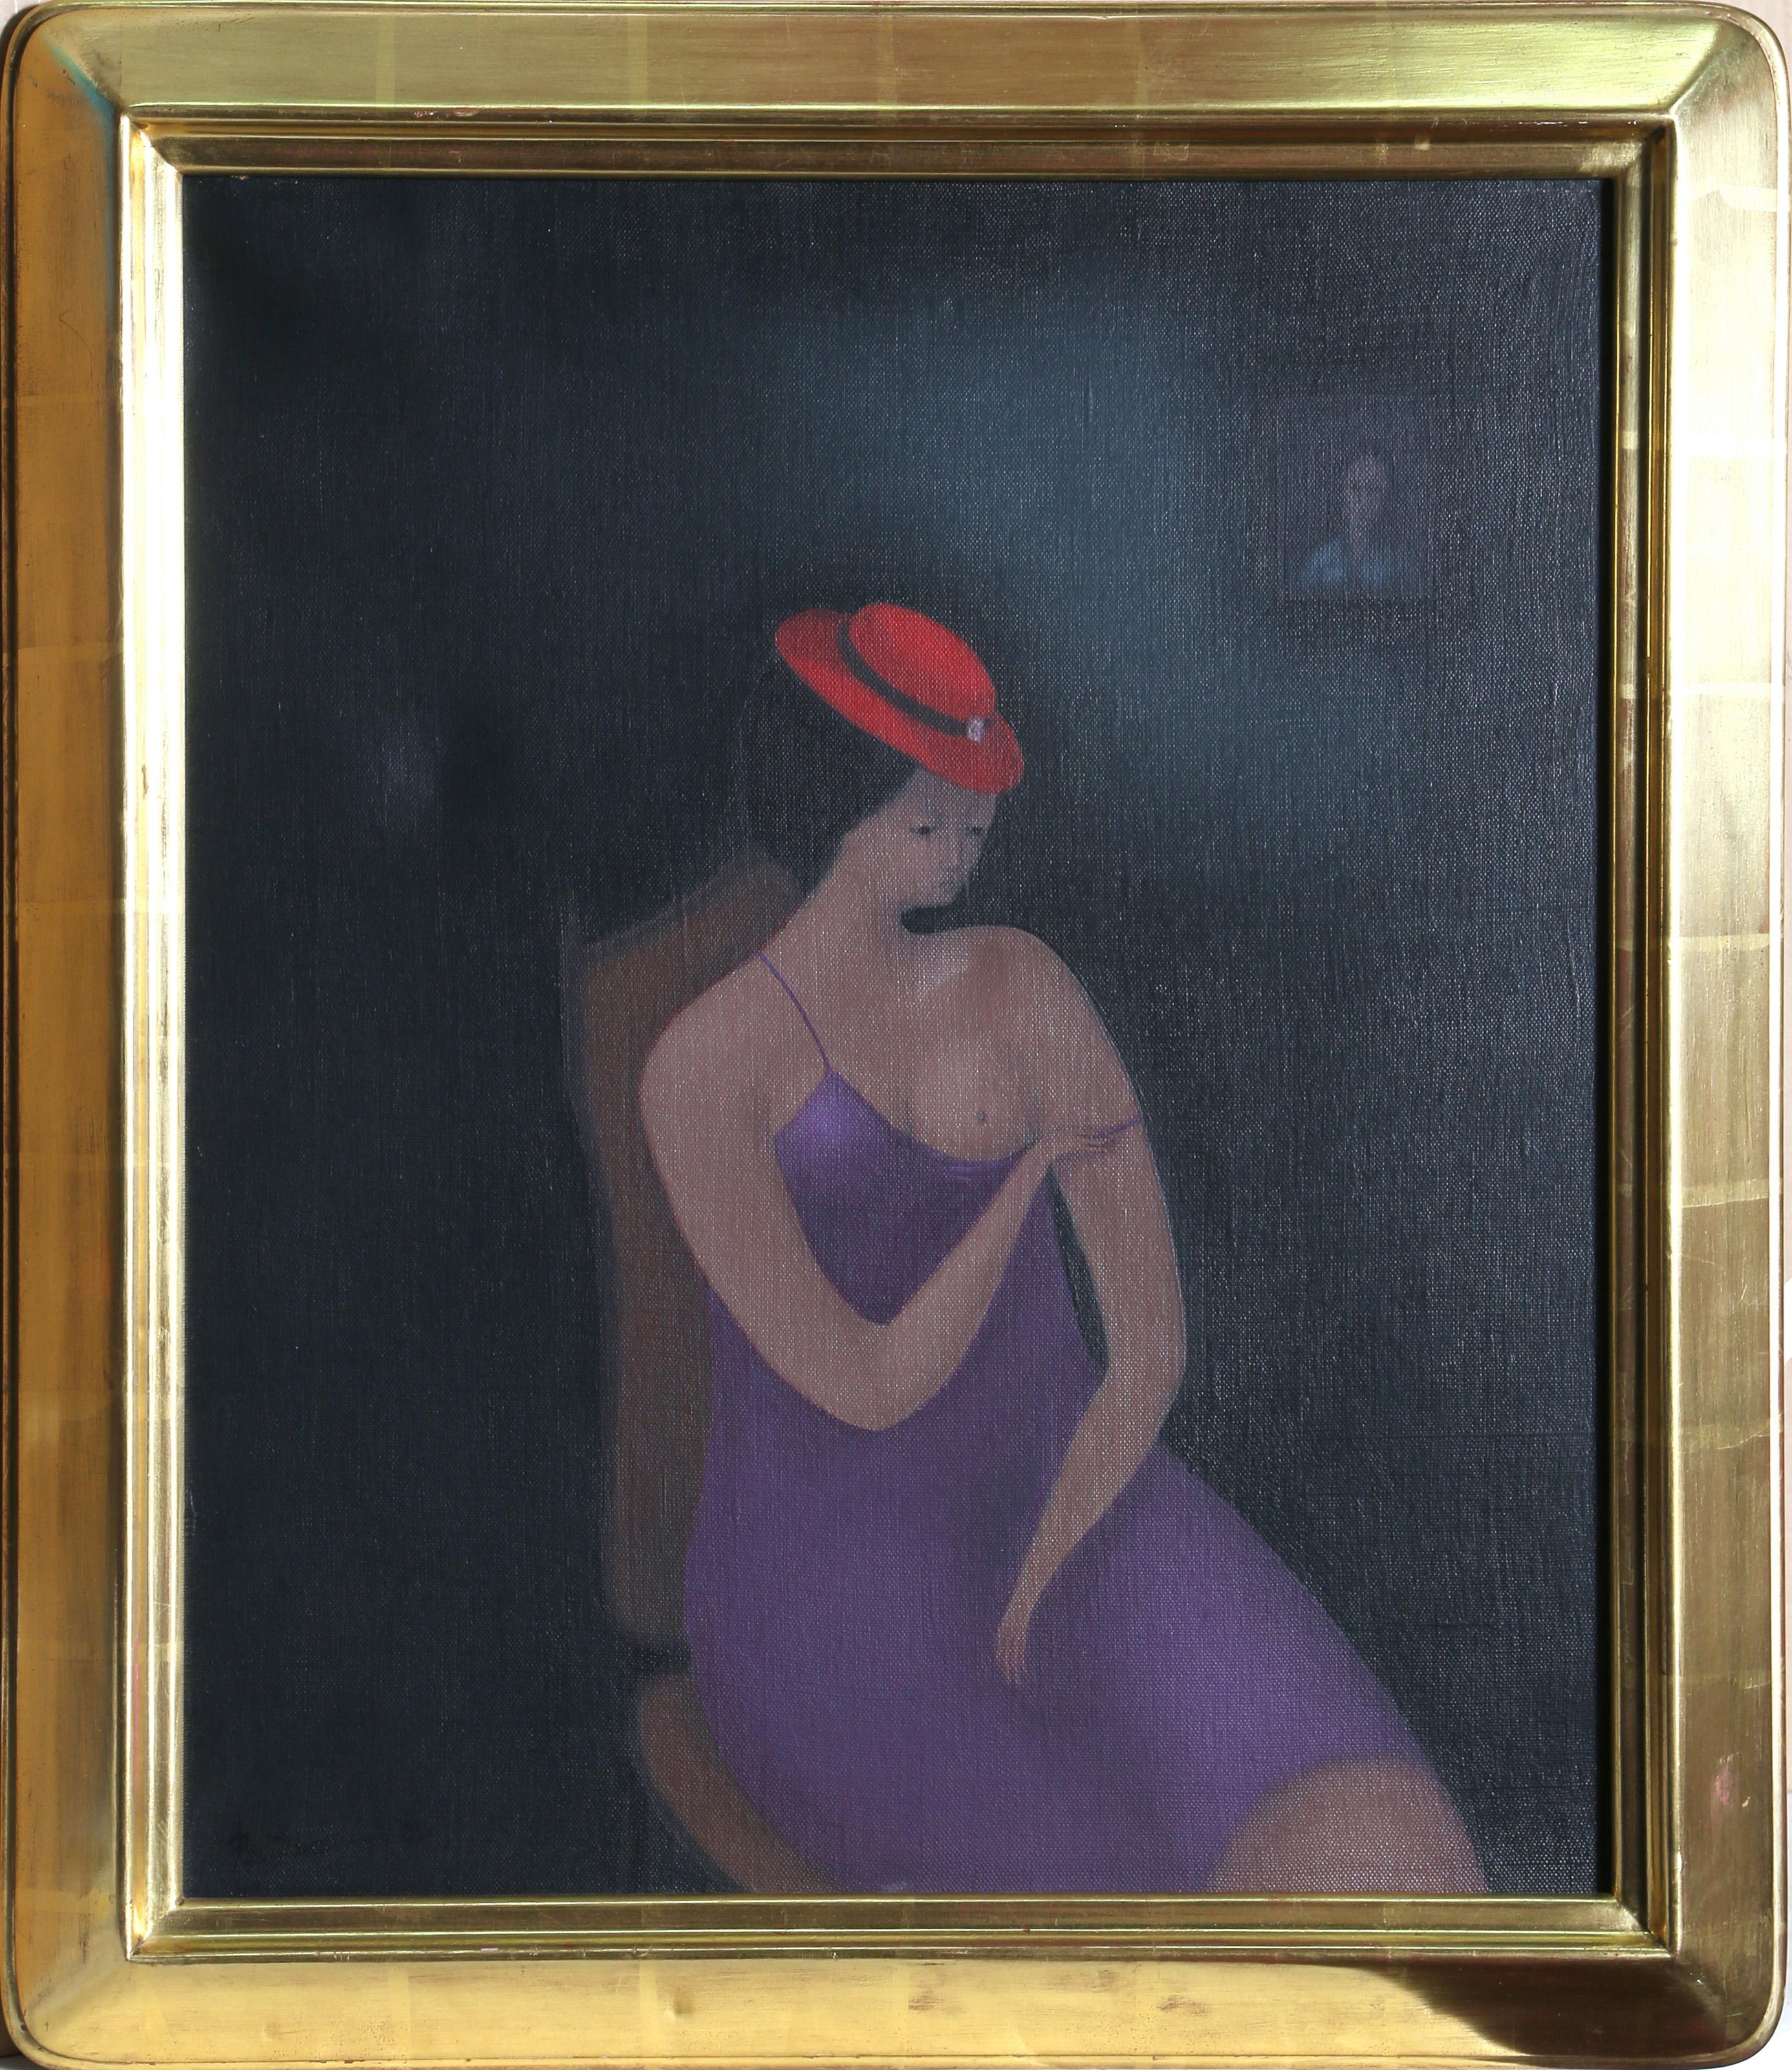 Branko Bahunek, Croatian (1935 - ) -  Red Hat. Year: 1991, Medium: Oil on Canvas, signed and dated, Size: 21.5  x 18 in. (54.61  x 45.72 cm), Frame Size: 26 x 22 inches, Description: Wearing a red brimmed hat, the woman depicted in this Branko